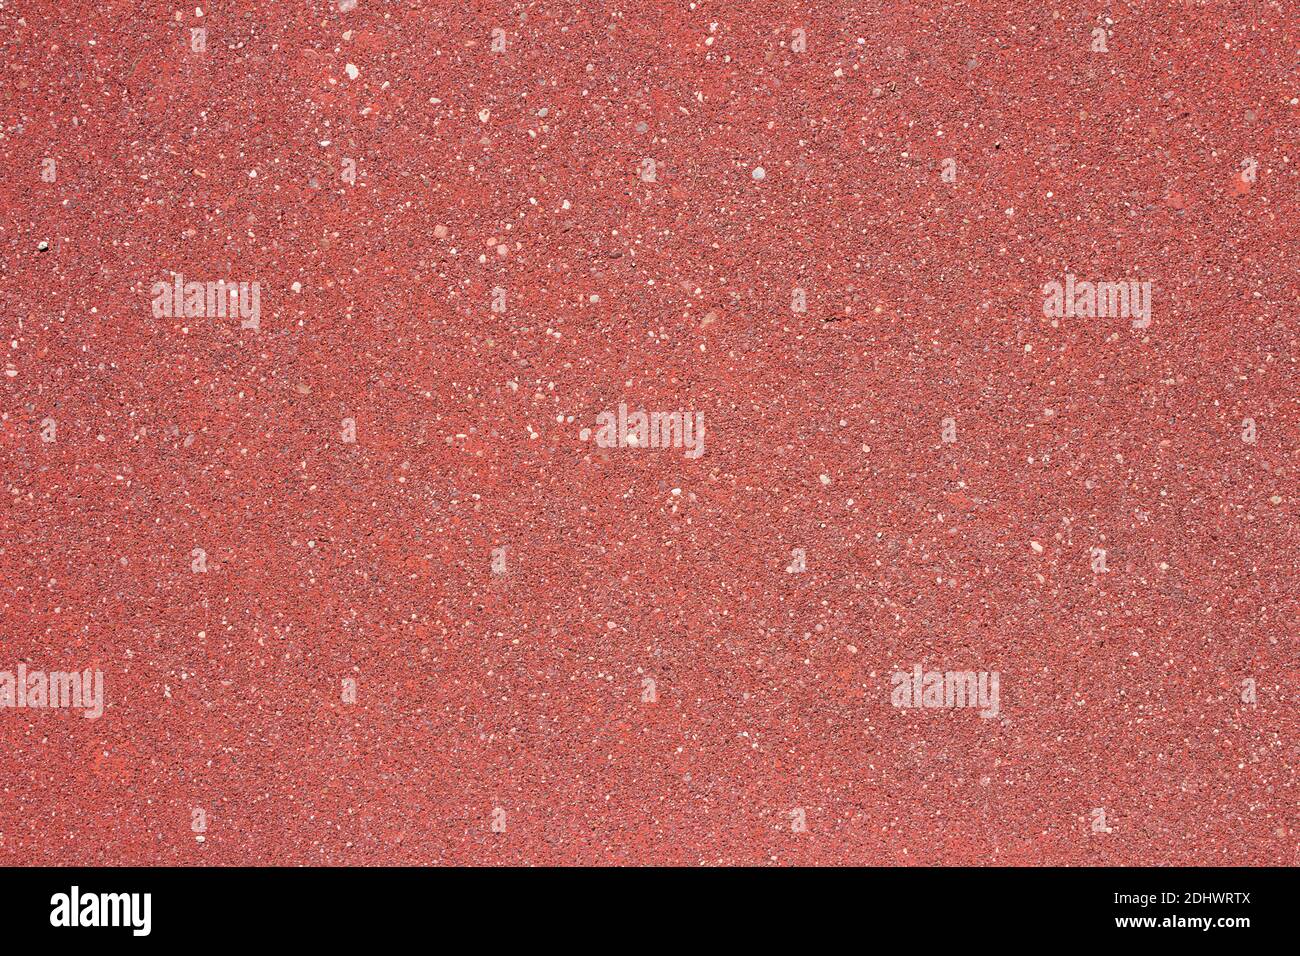 Aged Paper Sheet Texture. Blank Old Background with Dirty Stains. Stock  Photo - Image of element, pattern: 226001604